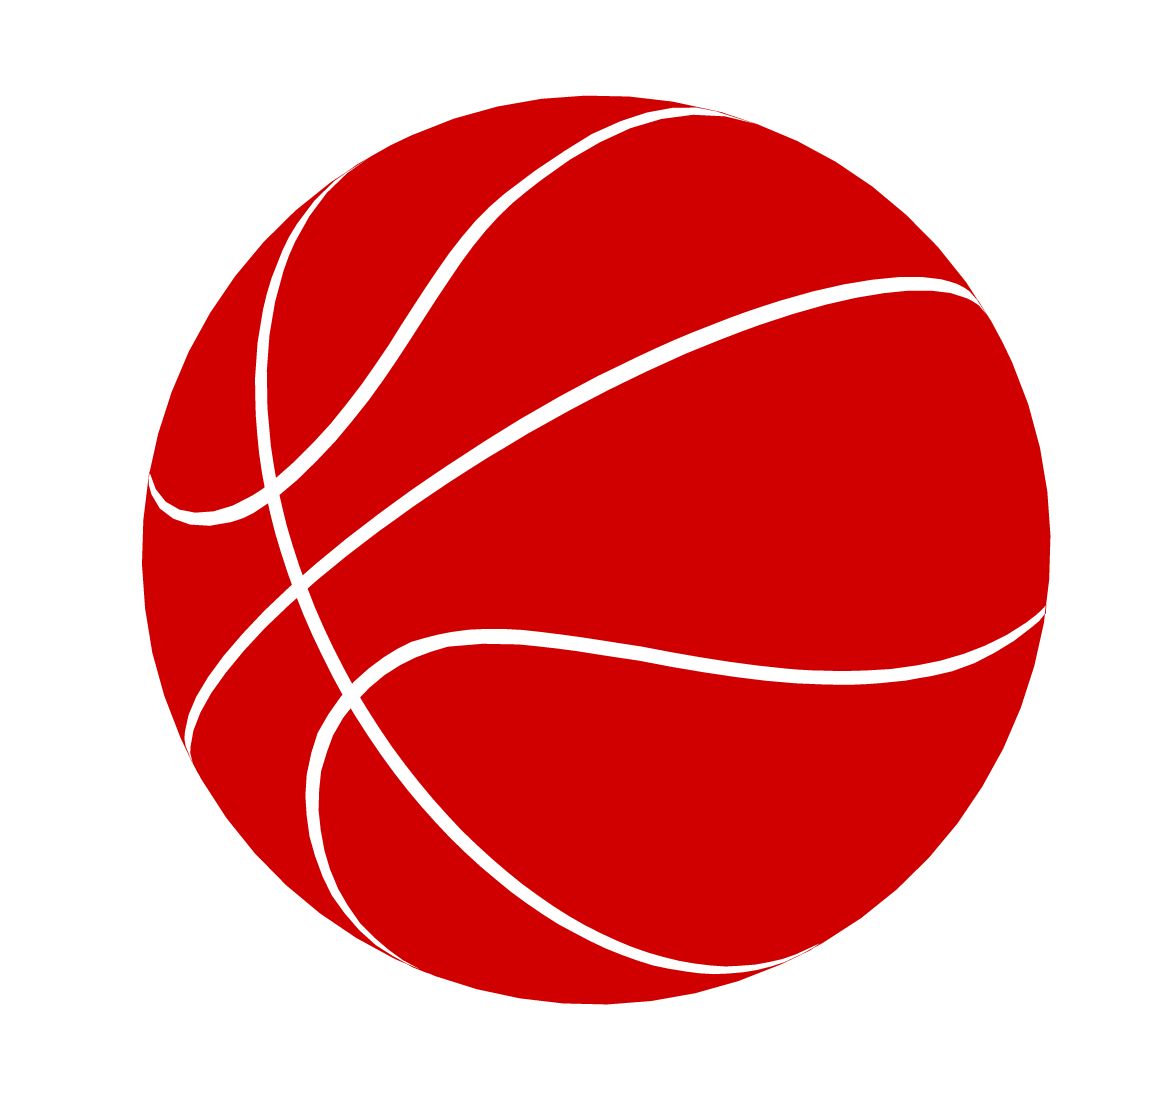 Red Ball with Logo - Ball Logos